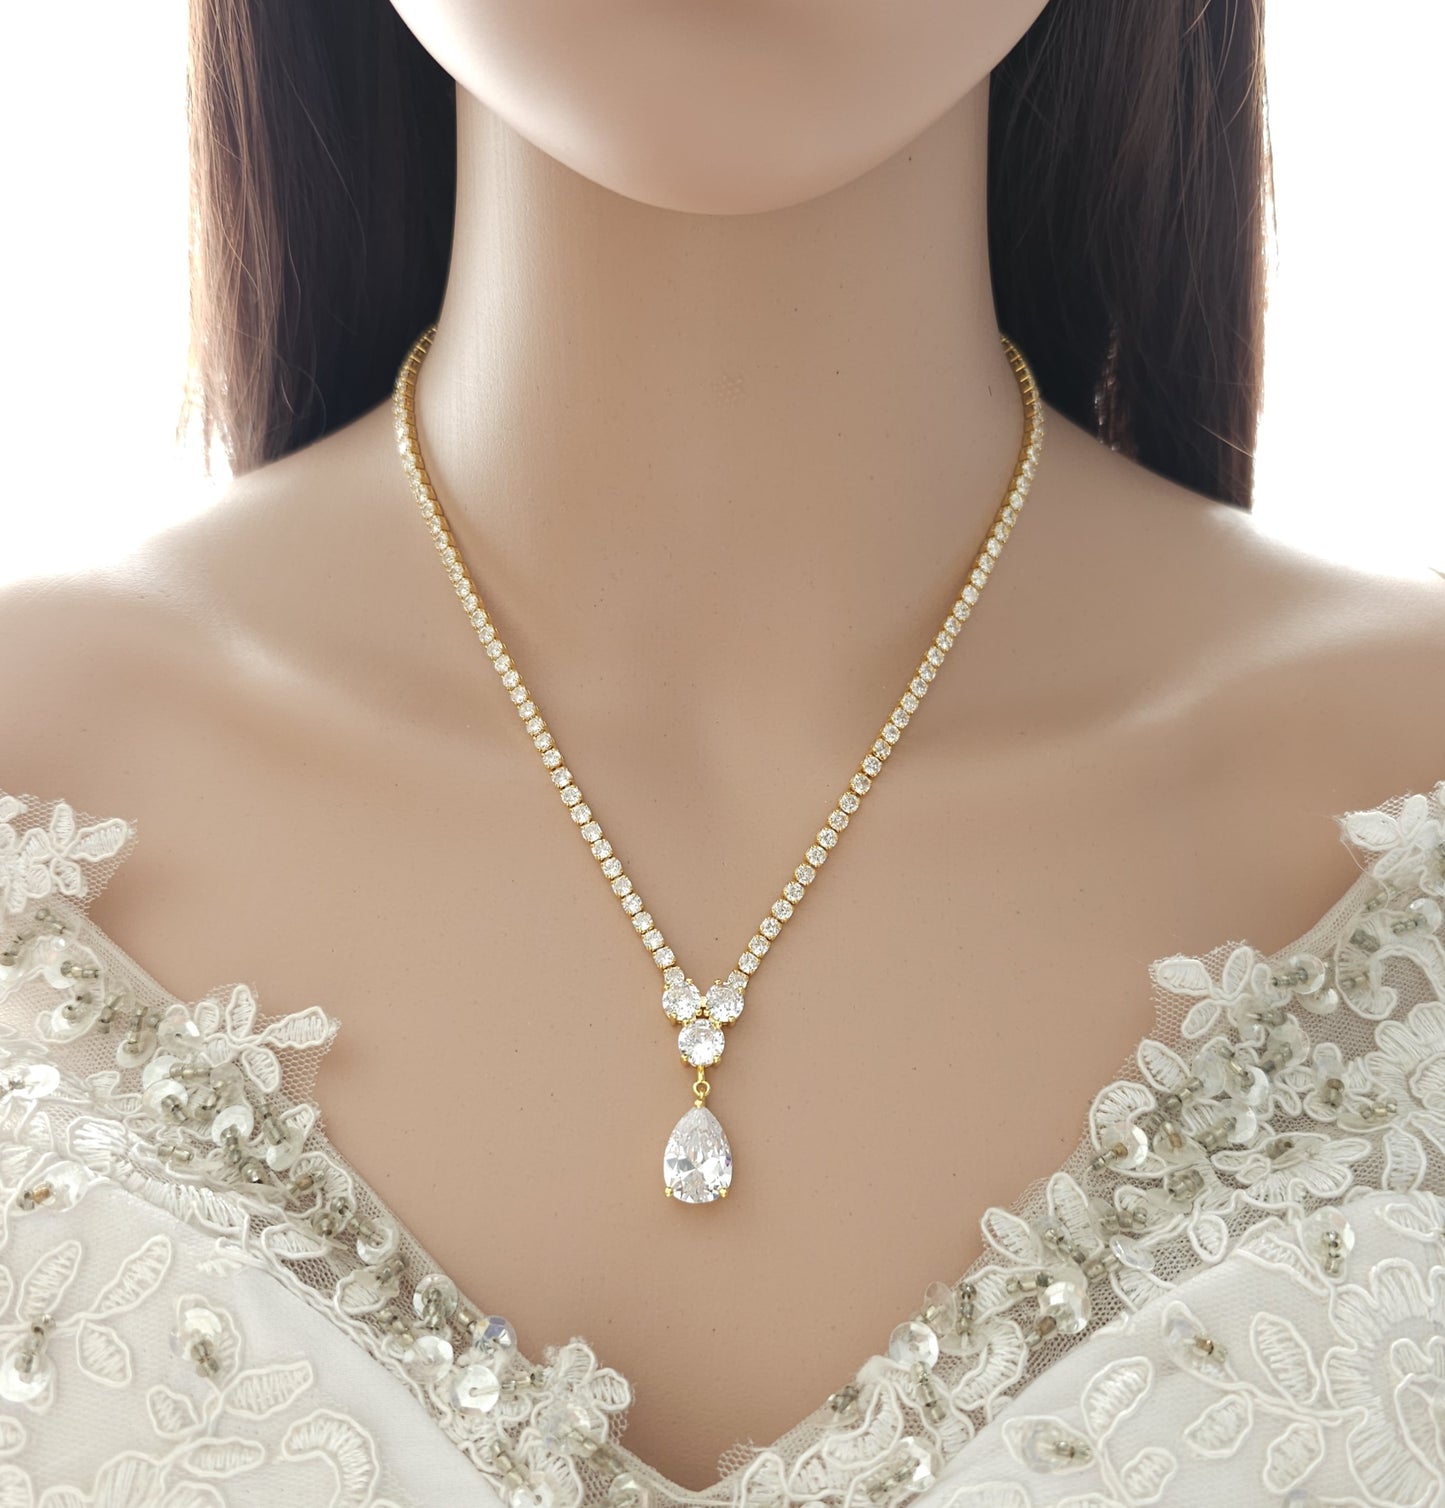 Bridal Necklace in Rose Gold and Cubic Zirconia-Diane